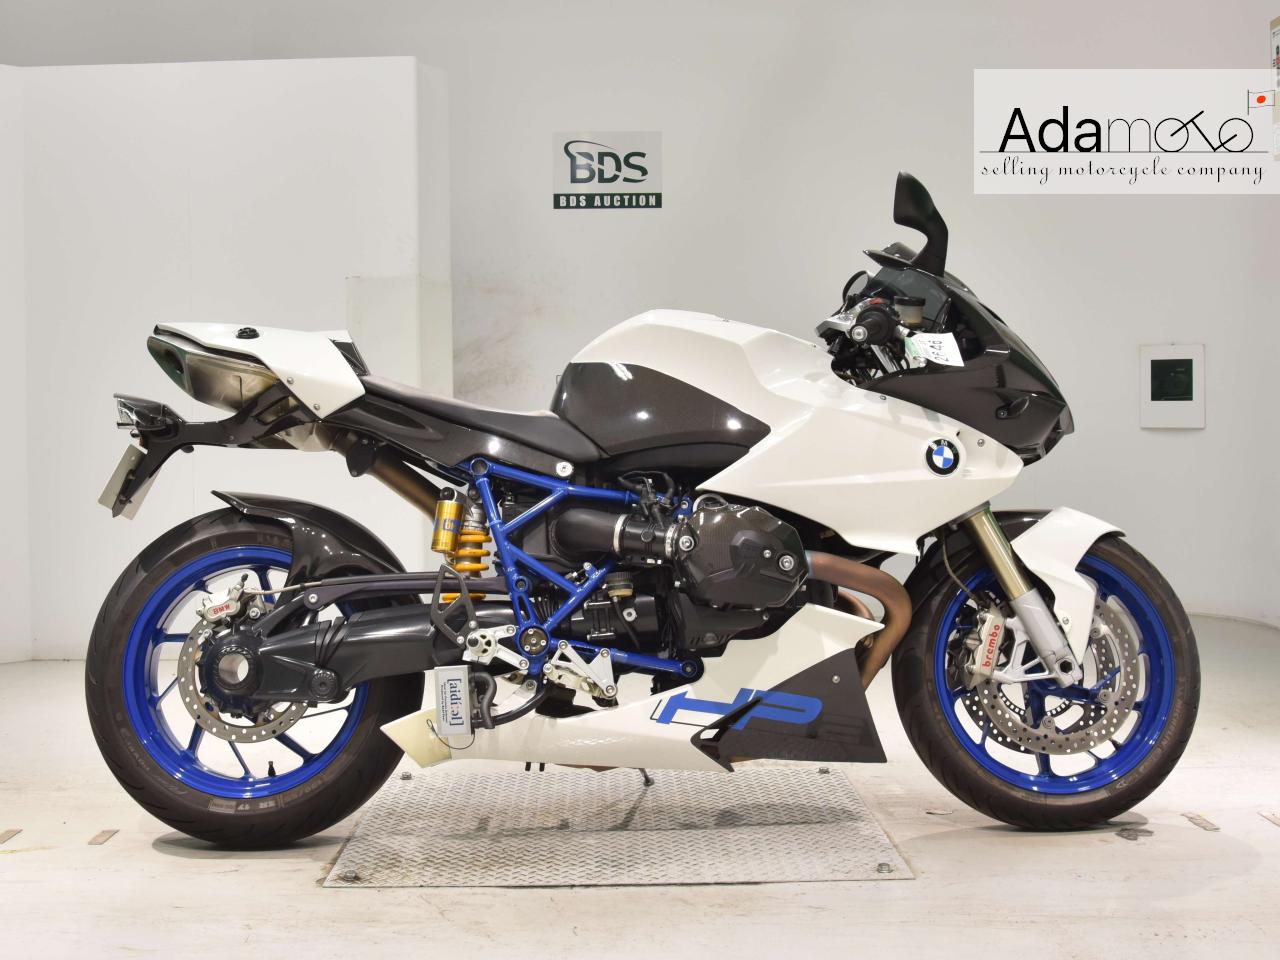 BMW HP2 SPORTS - Adamoto - Motorcycles from Japan